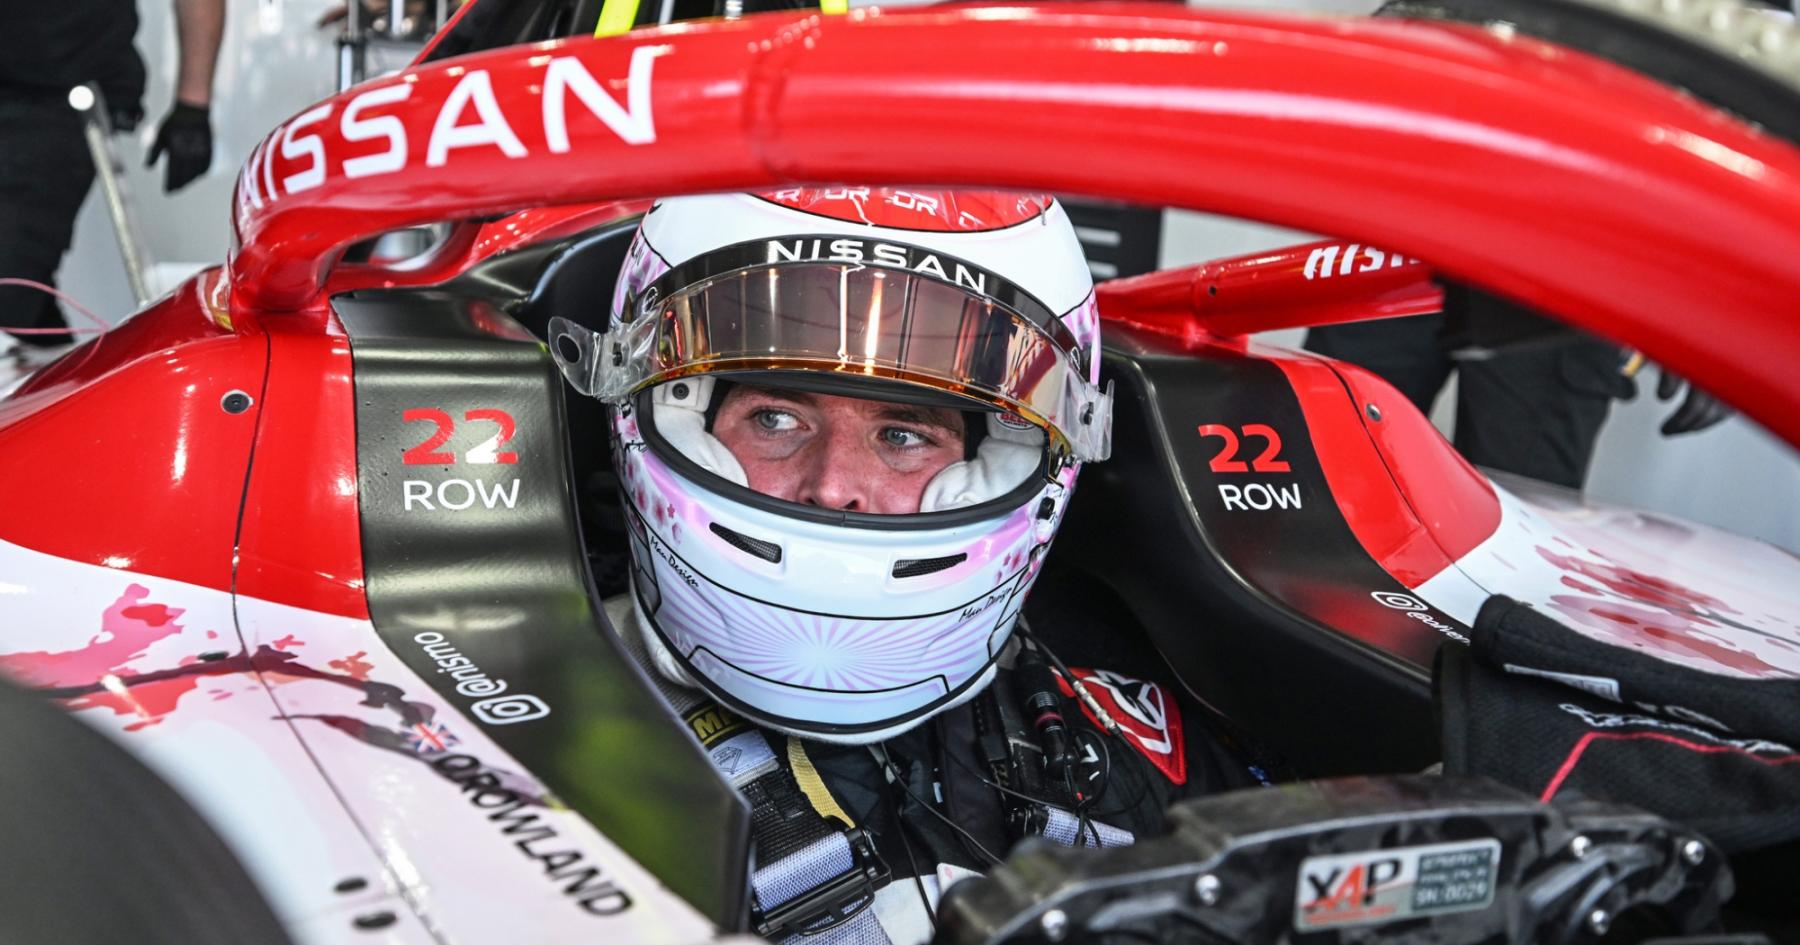 Nissan Secures Rowland with Multi-Year Deal